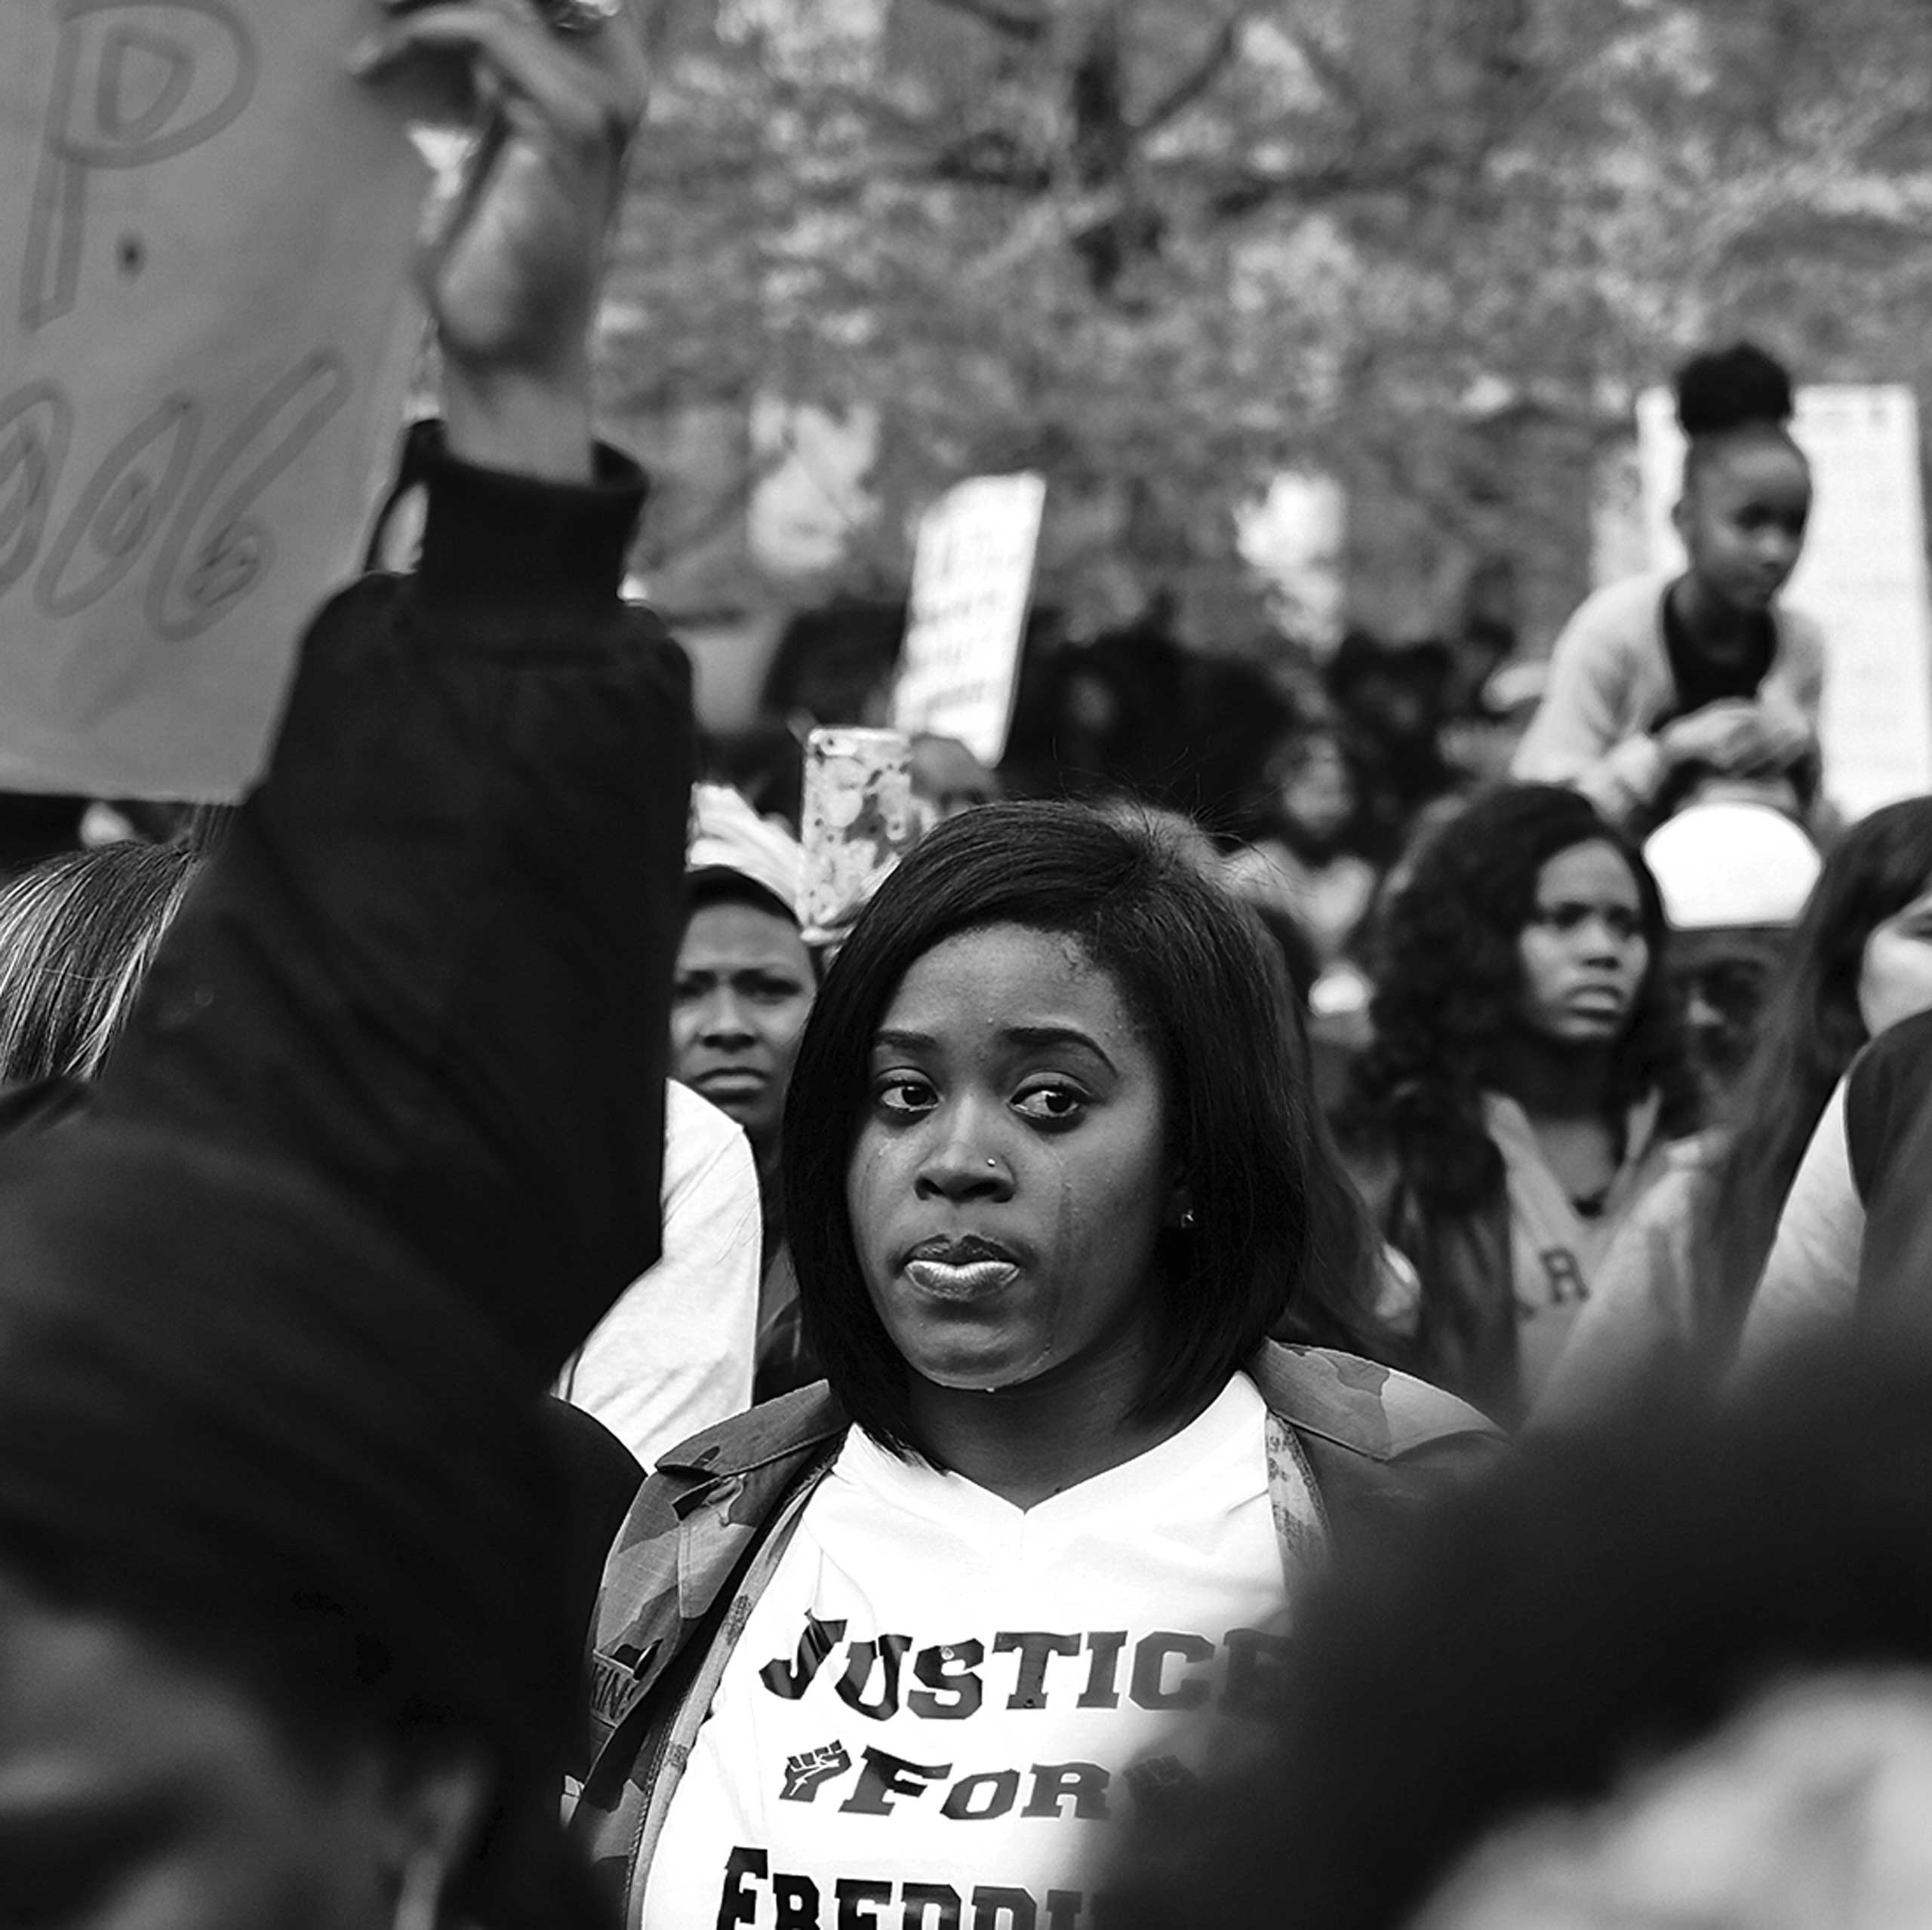 Protestor at city hall In Baltimore on April 25, 2015.